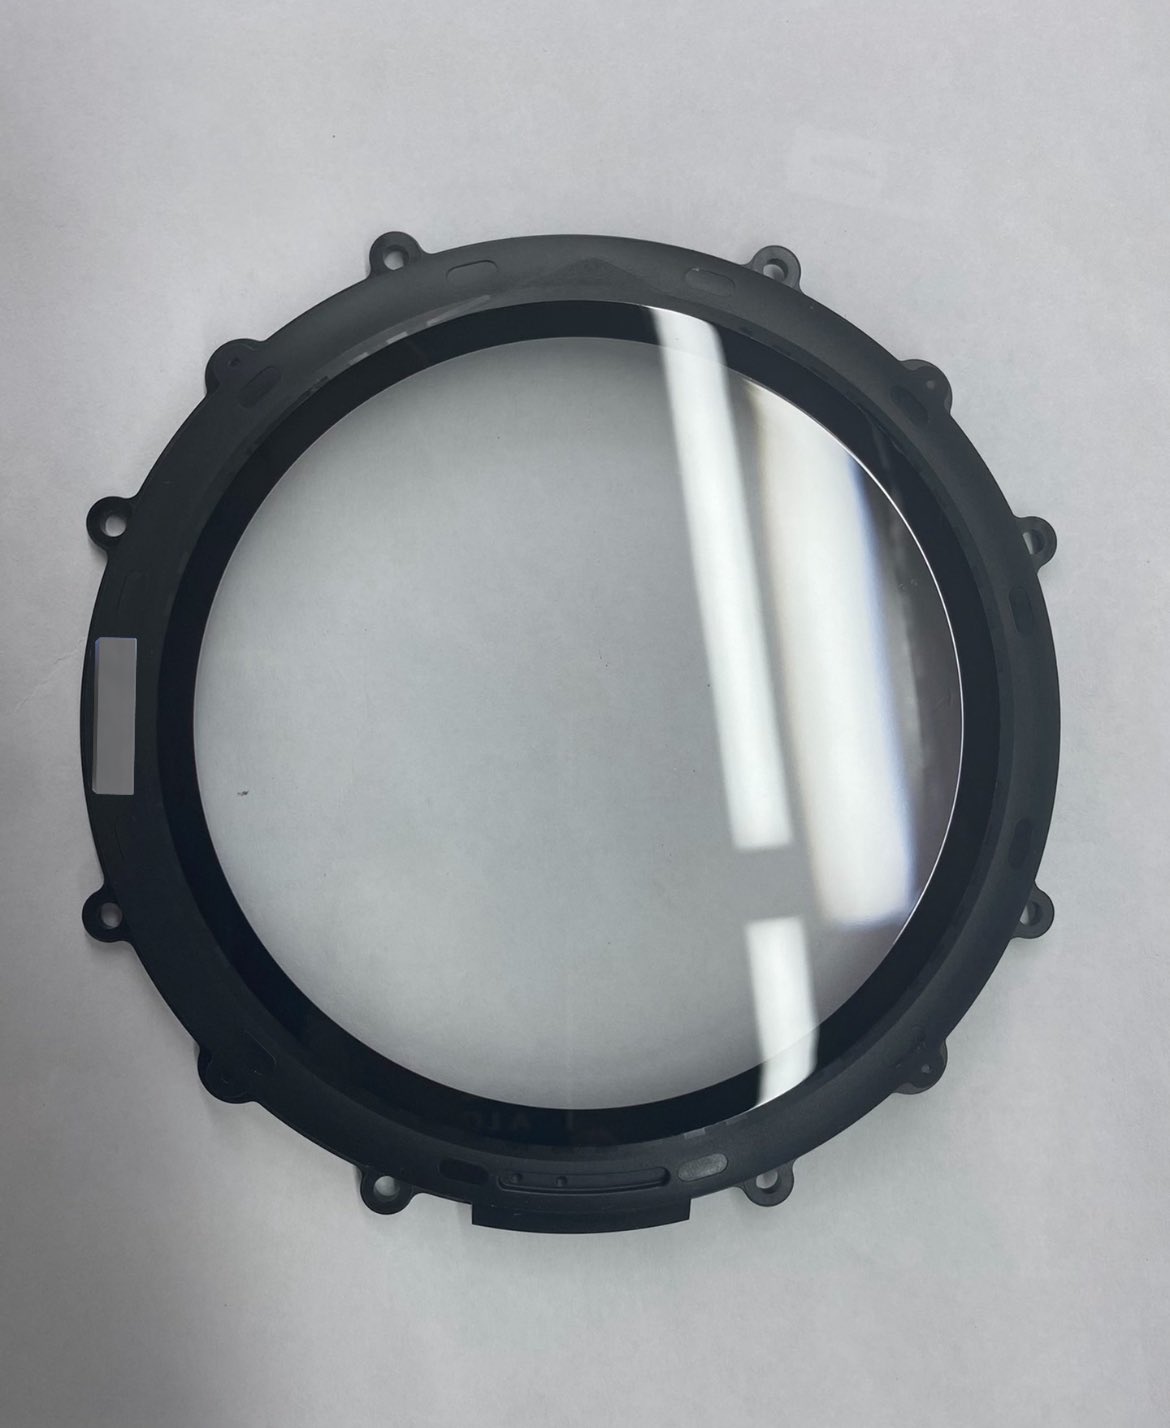 Display Cover Glass for New HomePod Allegedly Leaked